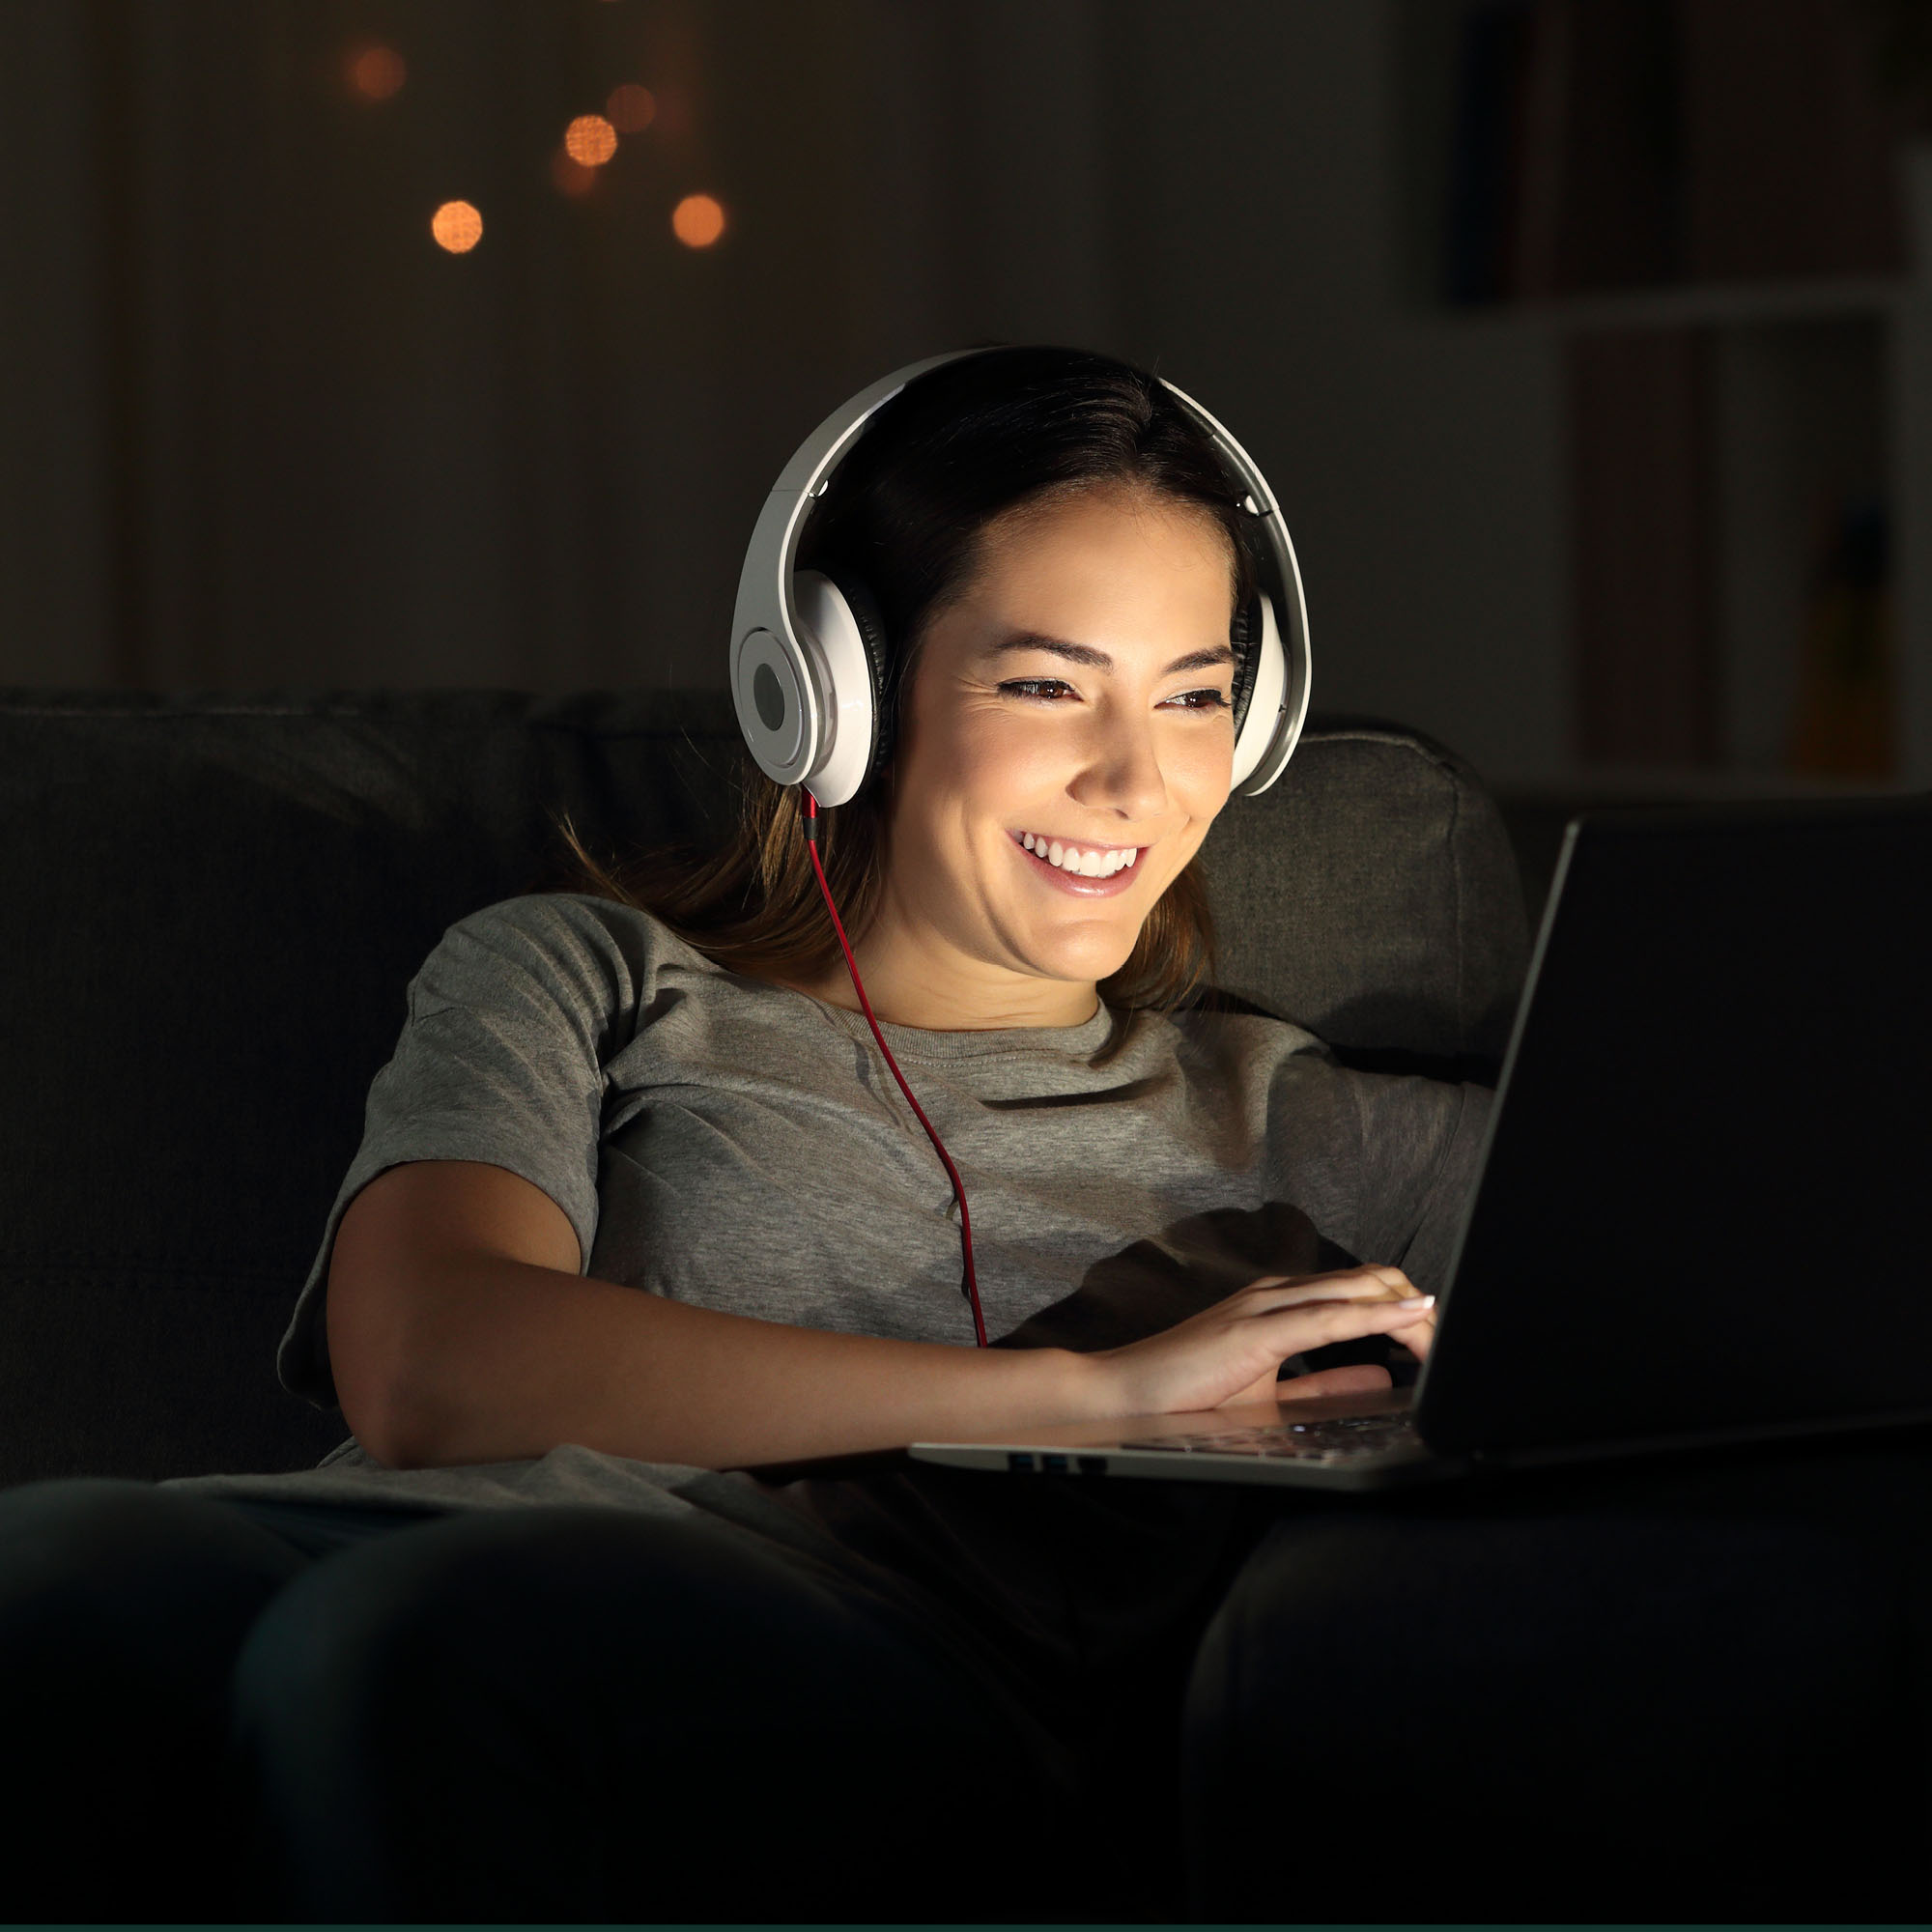 Young women wearing large headphones watching streamed content on her laptop